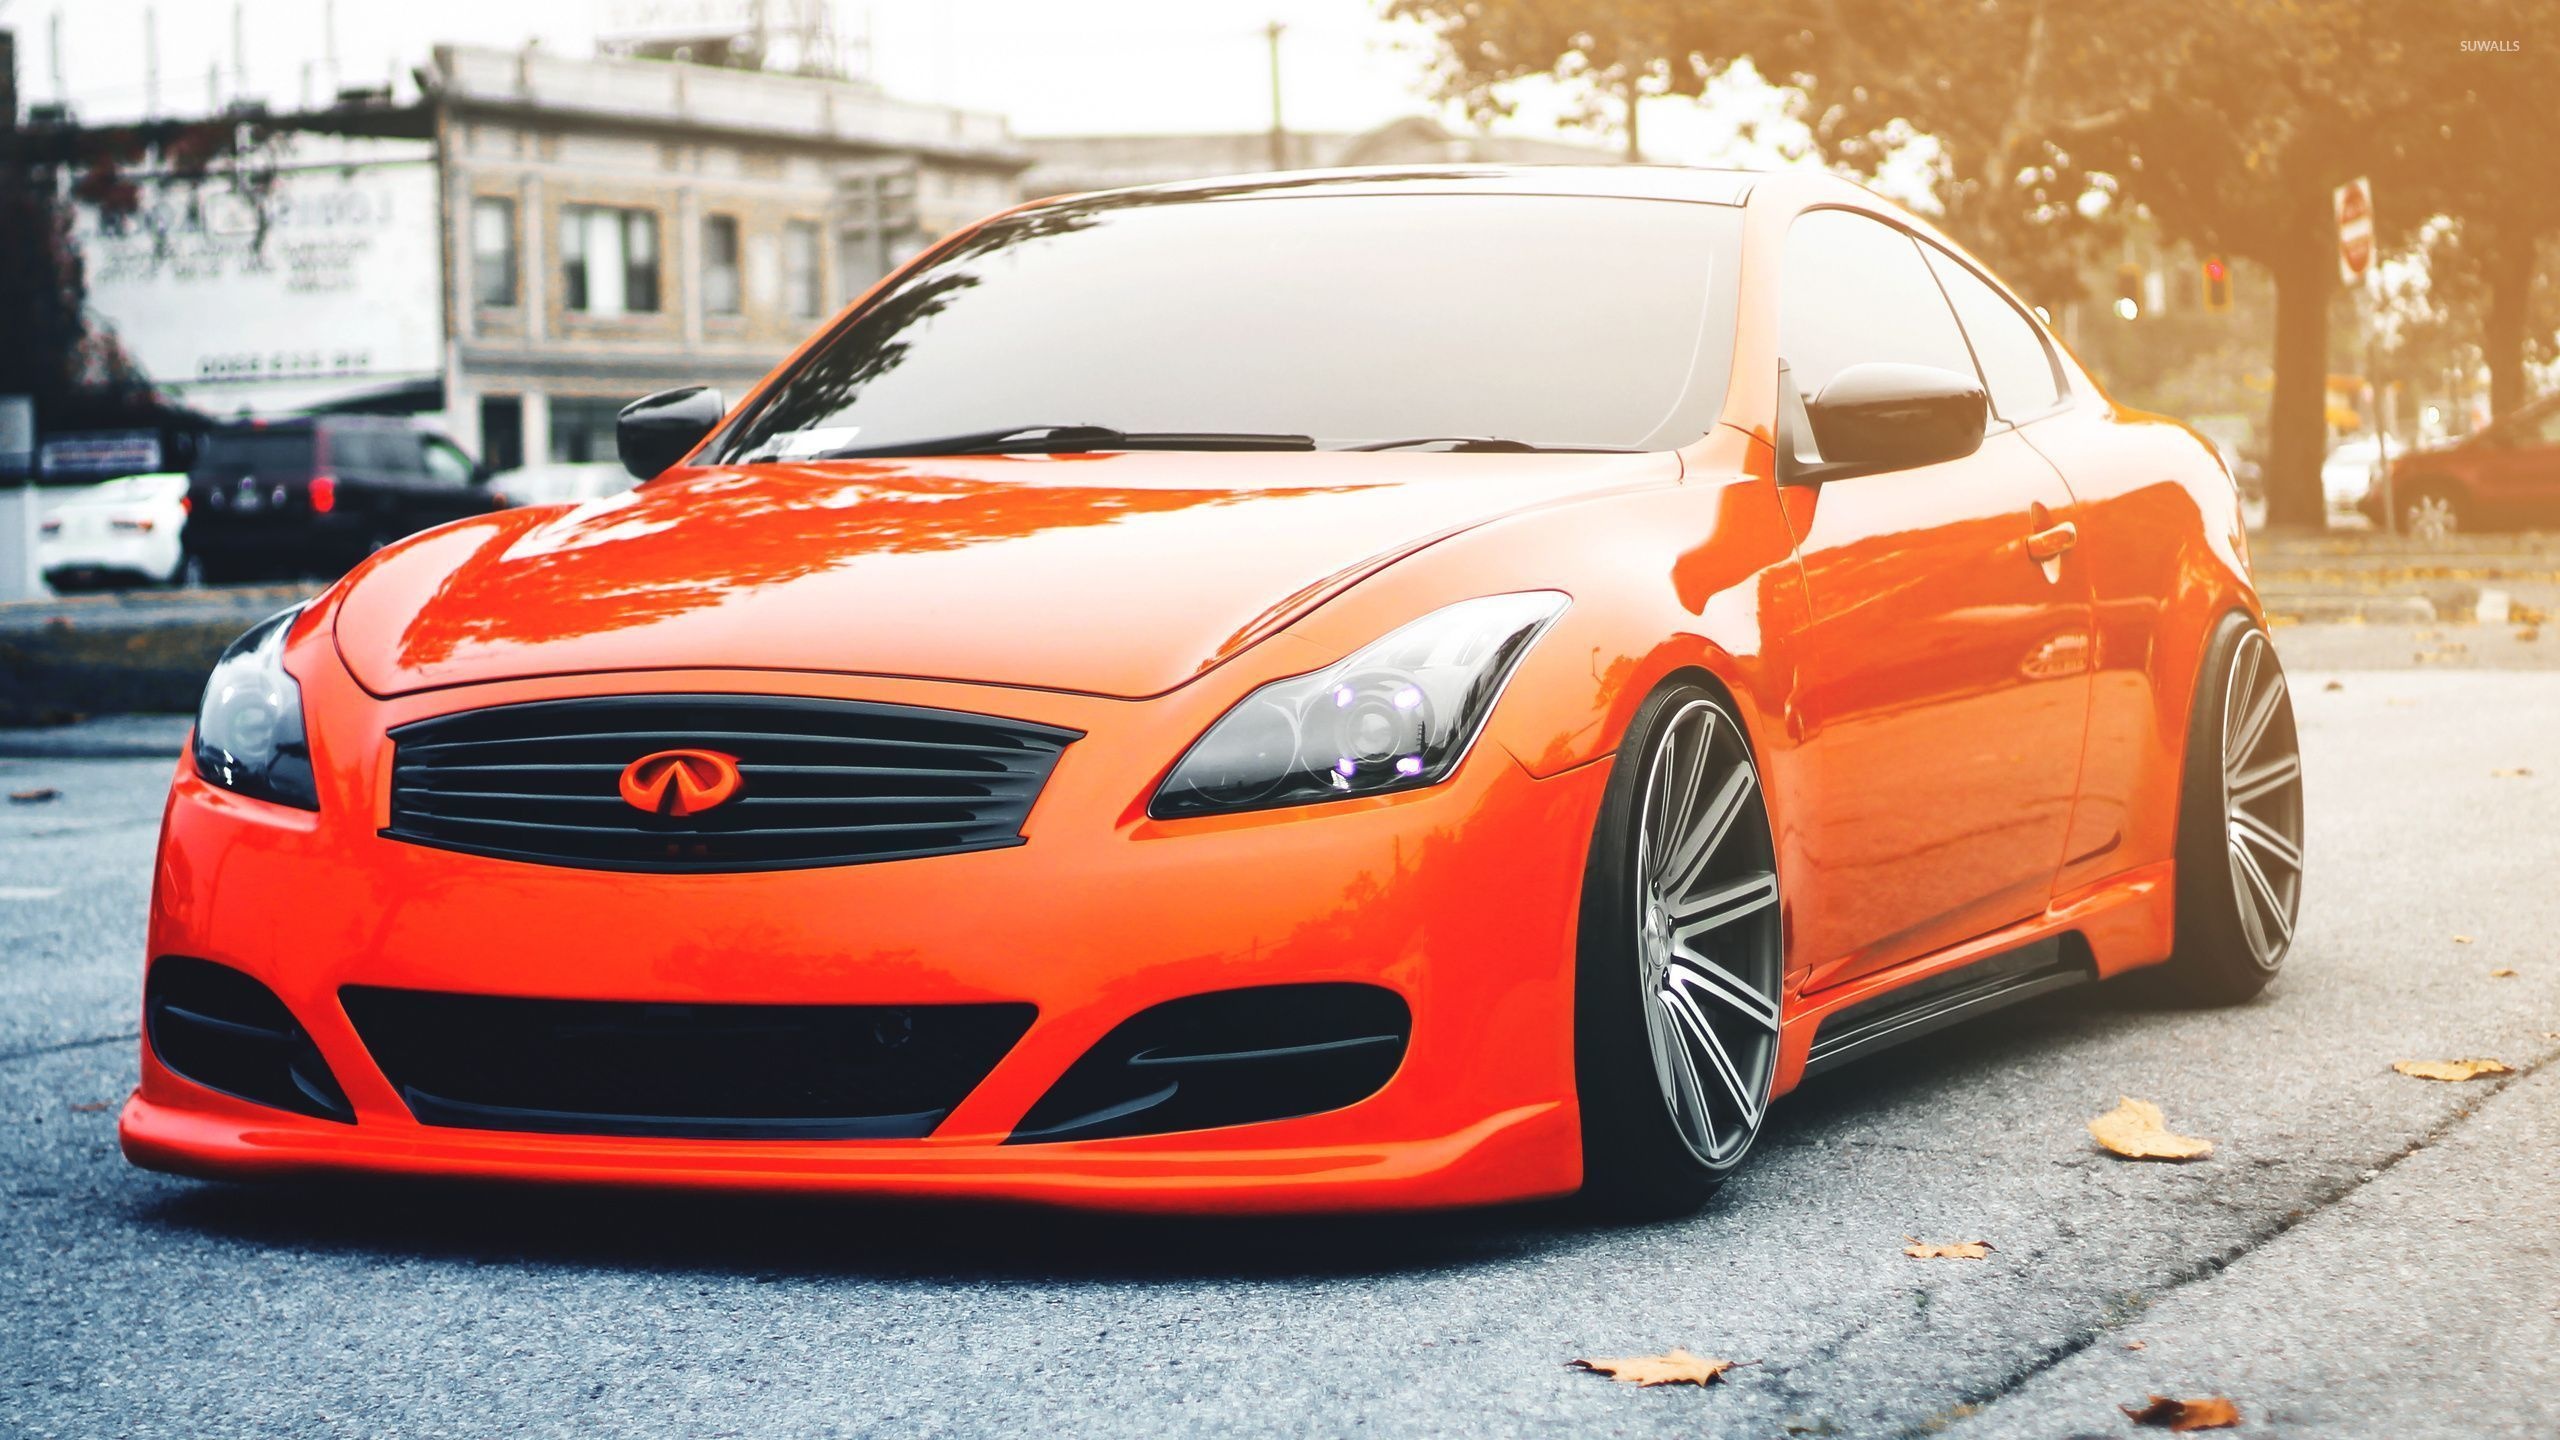 Infiniti G37 Wallpaper posted by Samantha Sellers 2560x1440